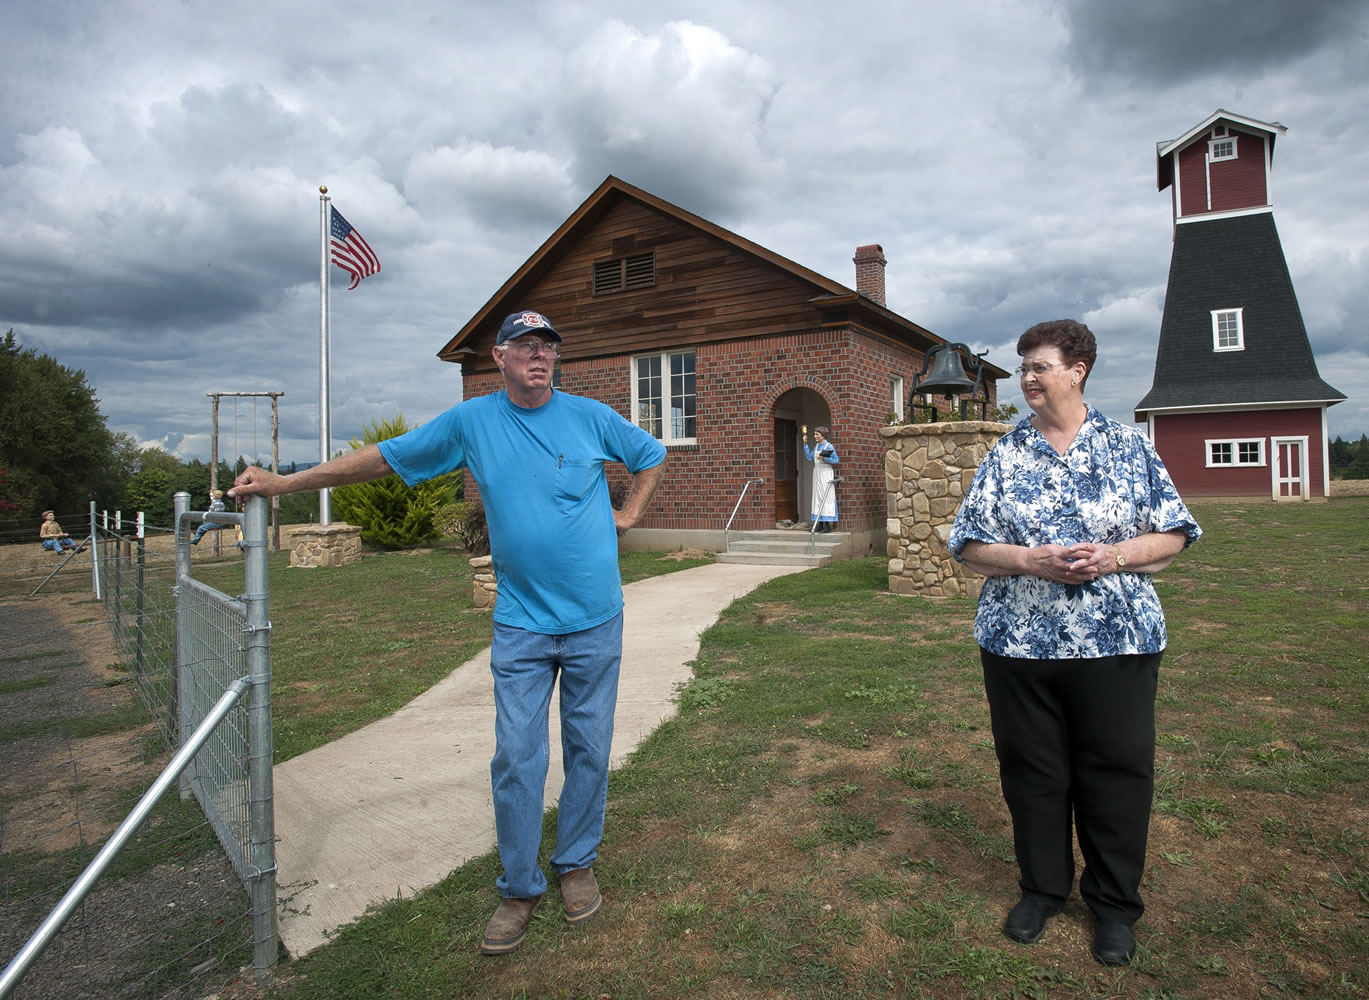 David Zylstra and his wife Carol pose for a portrait on their Ridgefield property in August.